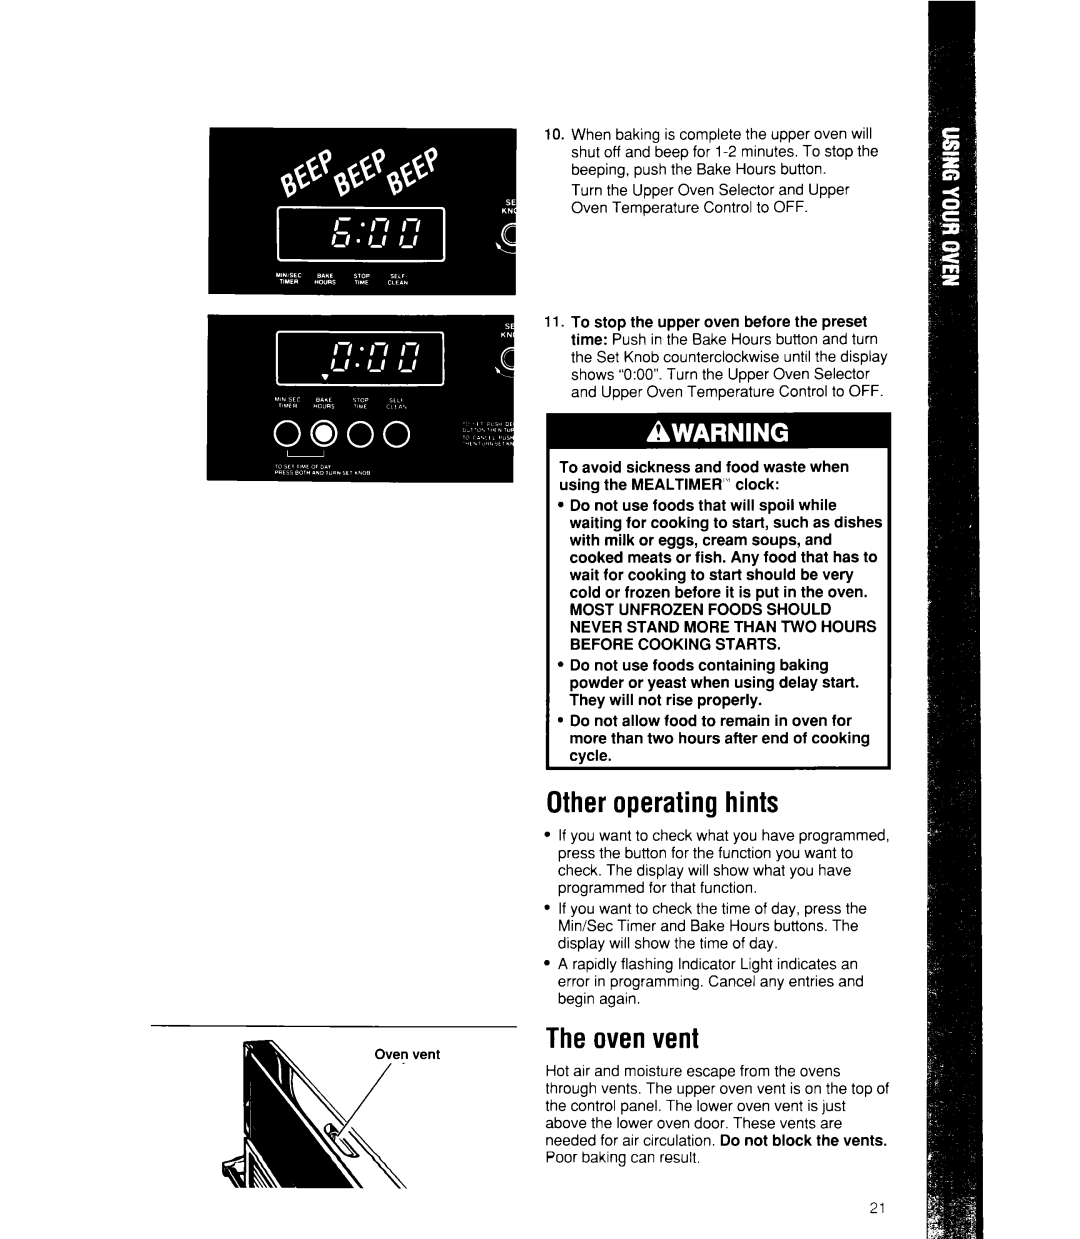 Whirlpool RB760PXX, RB770PXX, RB170PXX, RB160PXX manual Other operating hints, The oven vent 